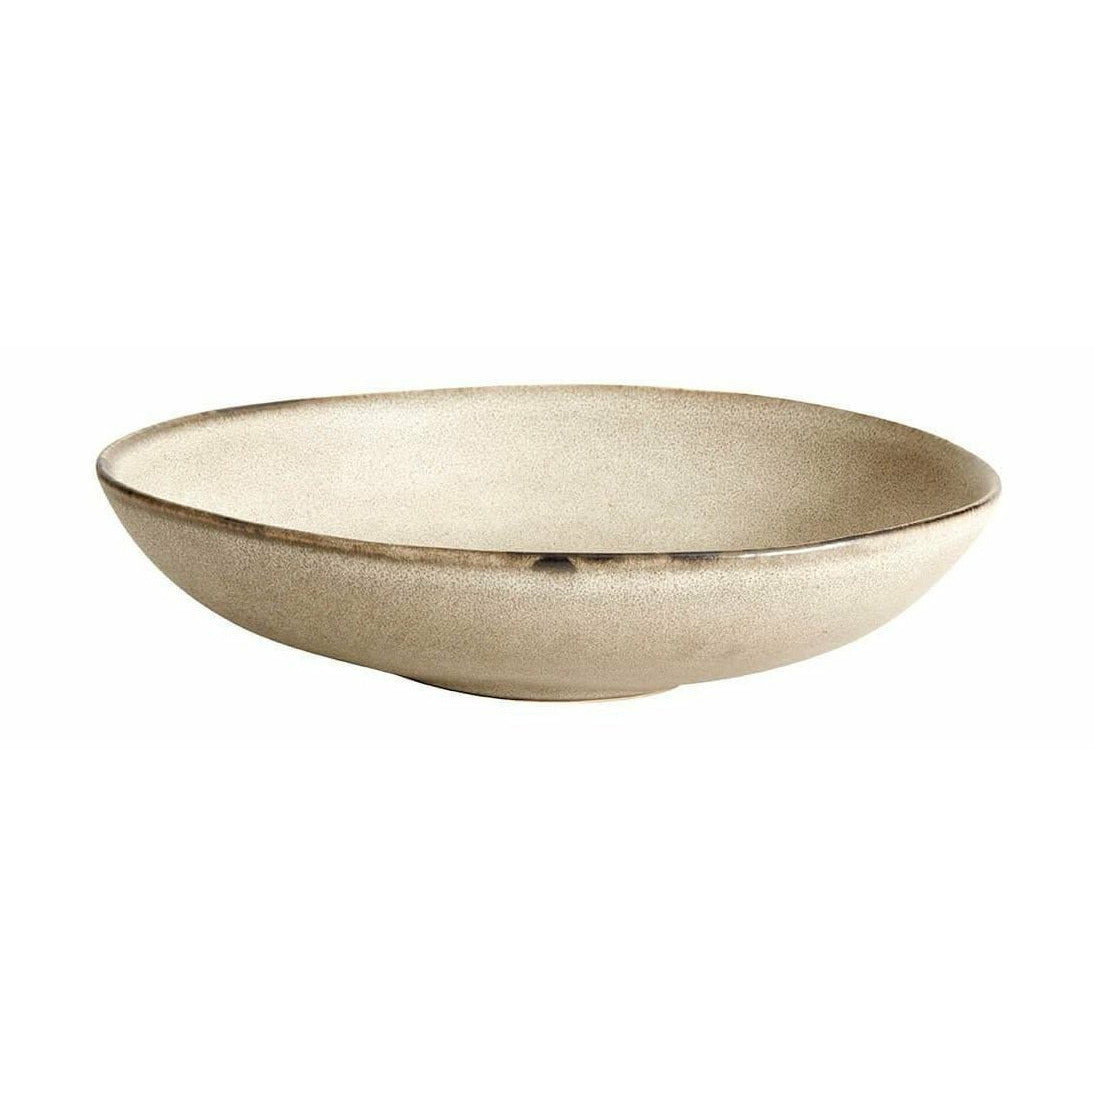 Muubs Mame Serving Bowl Oyster，19厘米